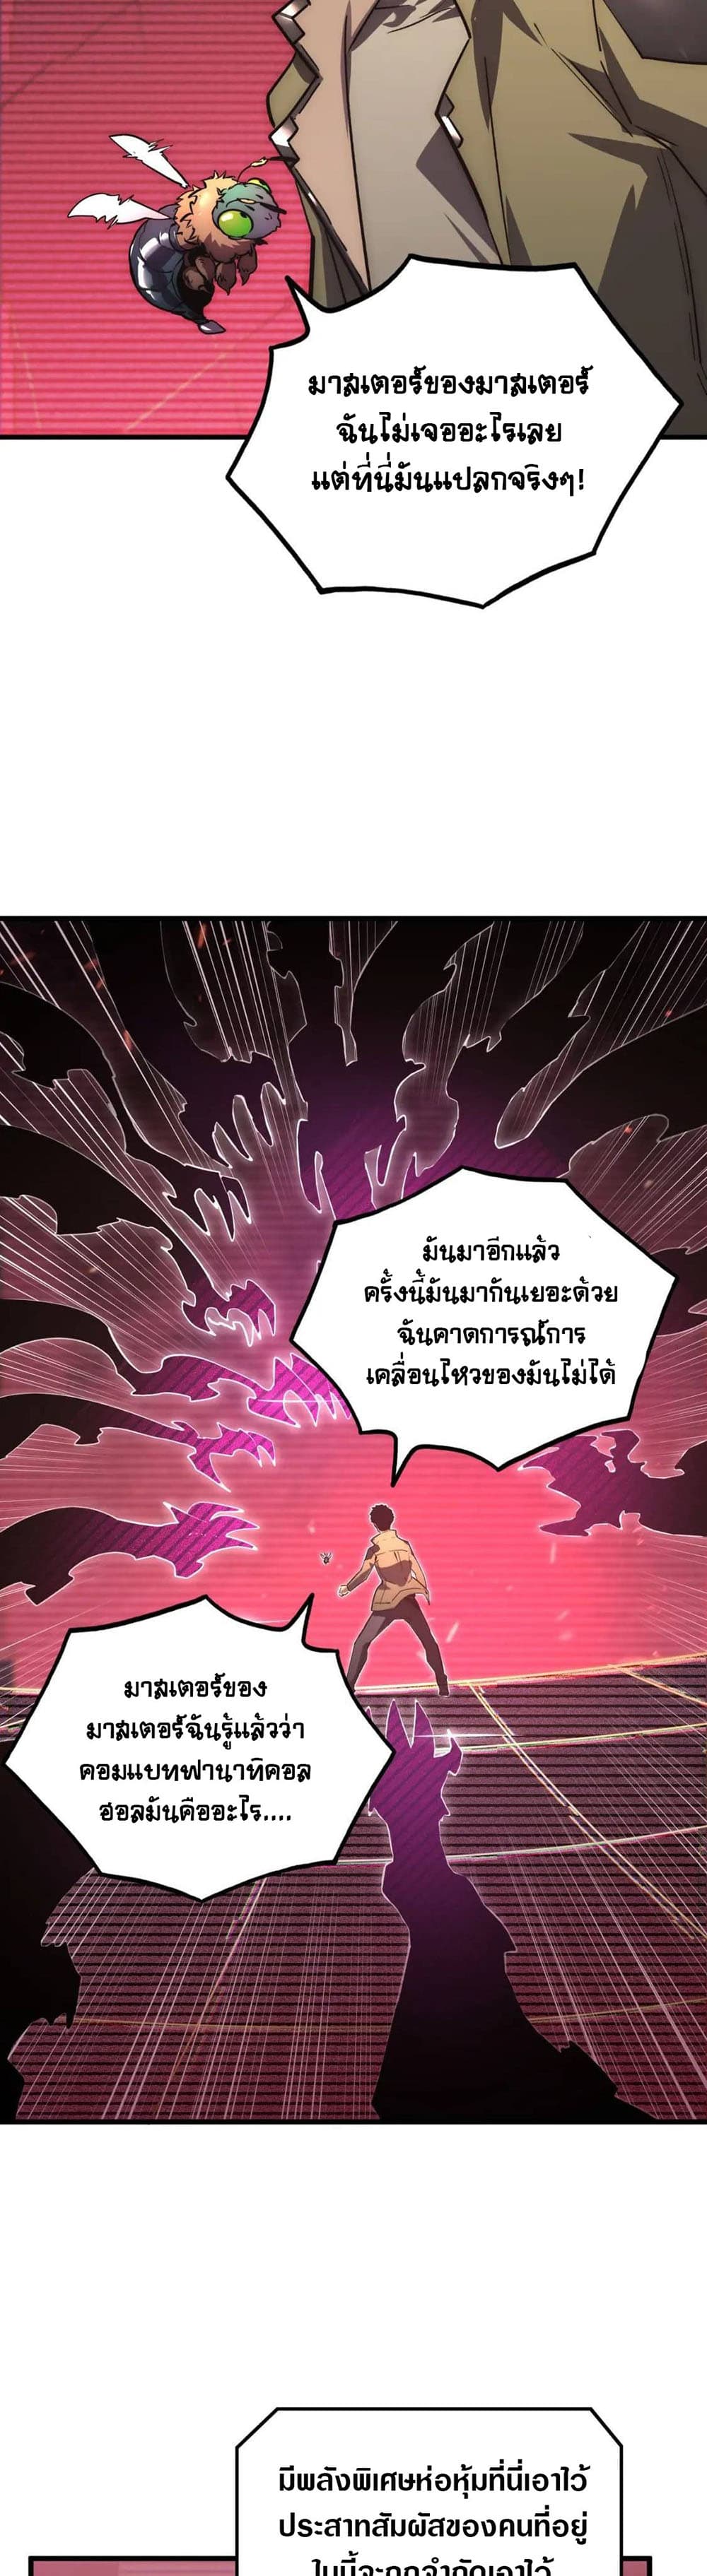 Rise From The Rubble เศษซากวันสิ้นโลก 174-174